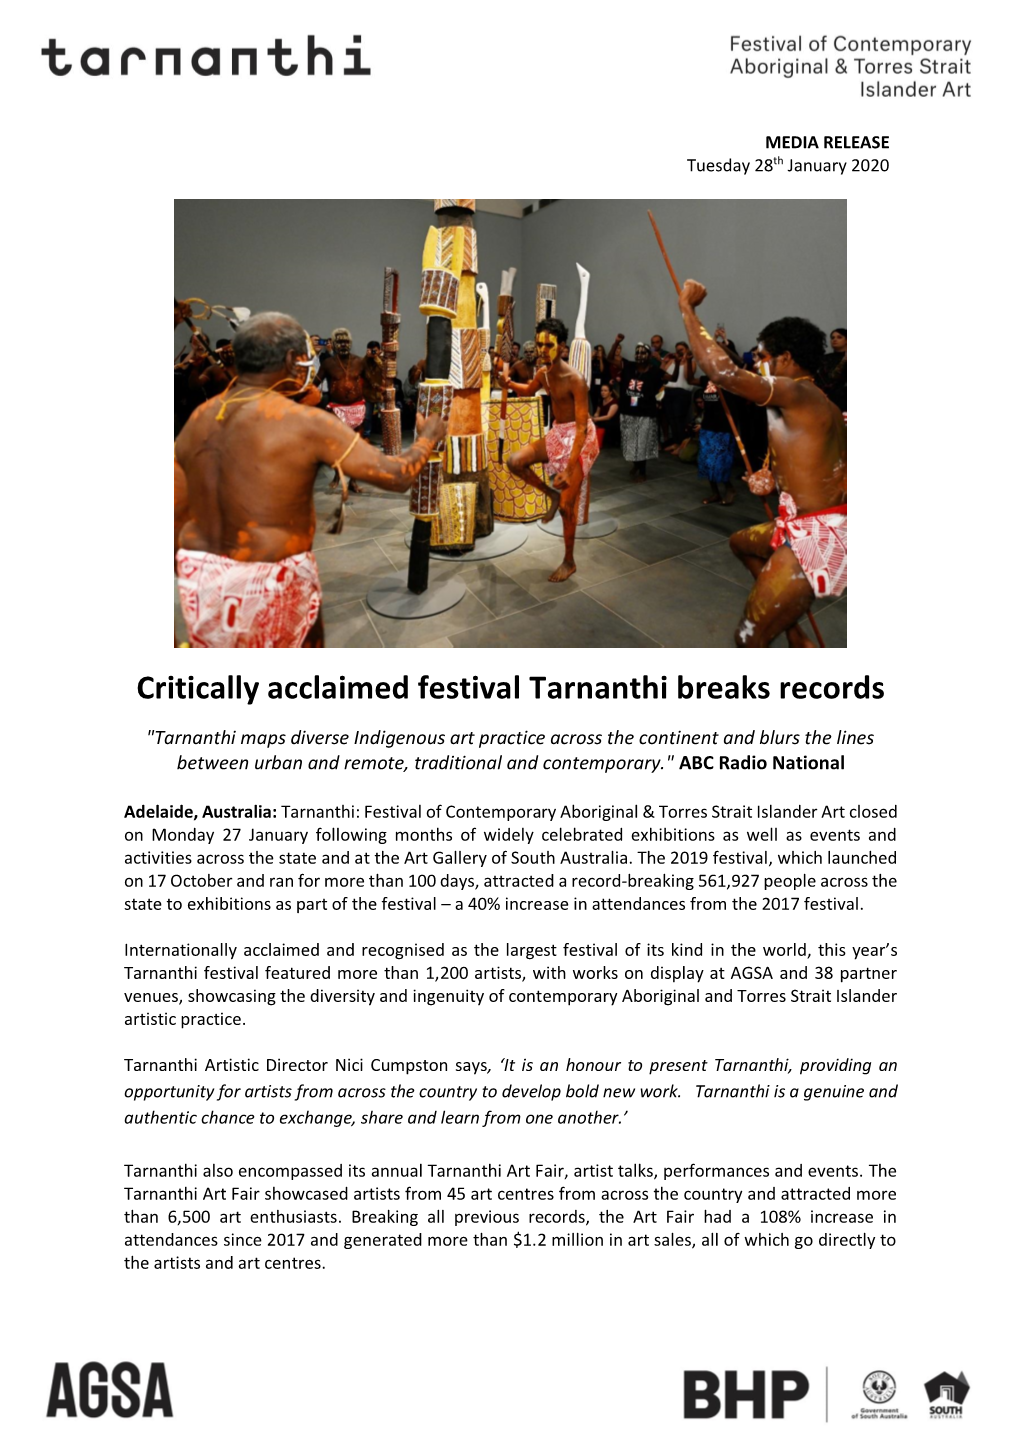 Critically Acclaimed Festival Tarnanthi Breaks Records